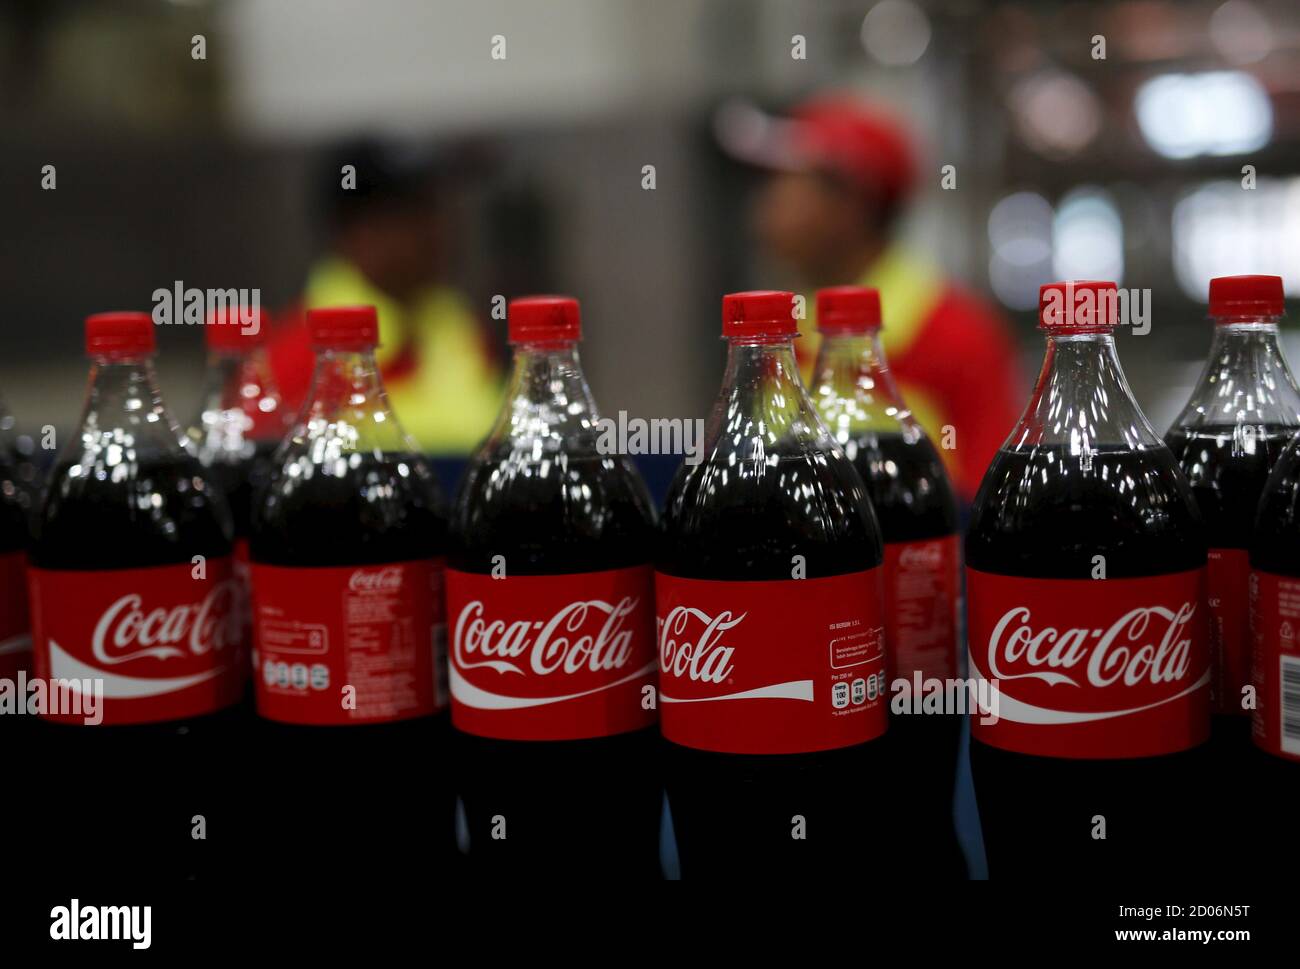 Workers stand near bottles of Coca-Cola on a newly inaugurated production line at the Cikedokan Plant in Bekasi, West Java near Jakarta March 31, 2015. The Coca-Cola company inaugurated two new production lines as part of an investment package worth some $500 million to accelerate growth in the Indonesian market.  REUTERS/Darren Whiteside Stock Photo